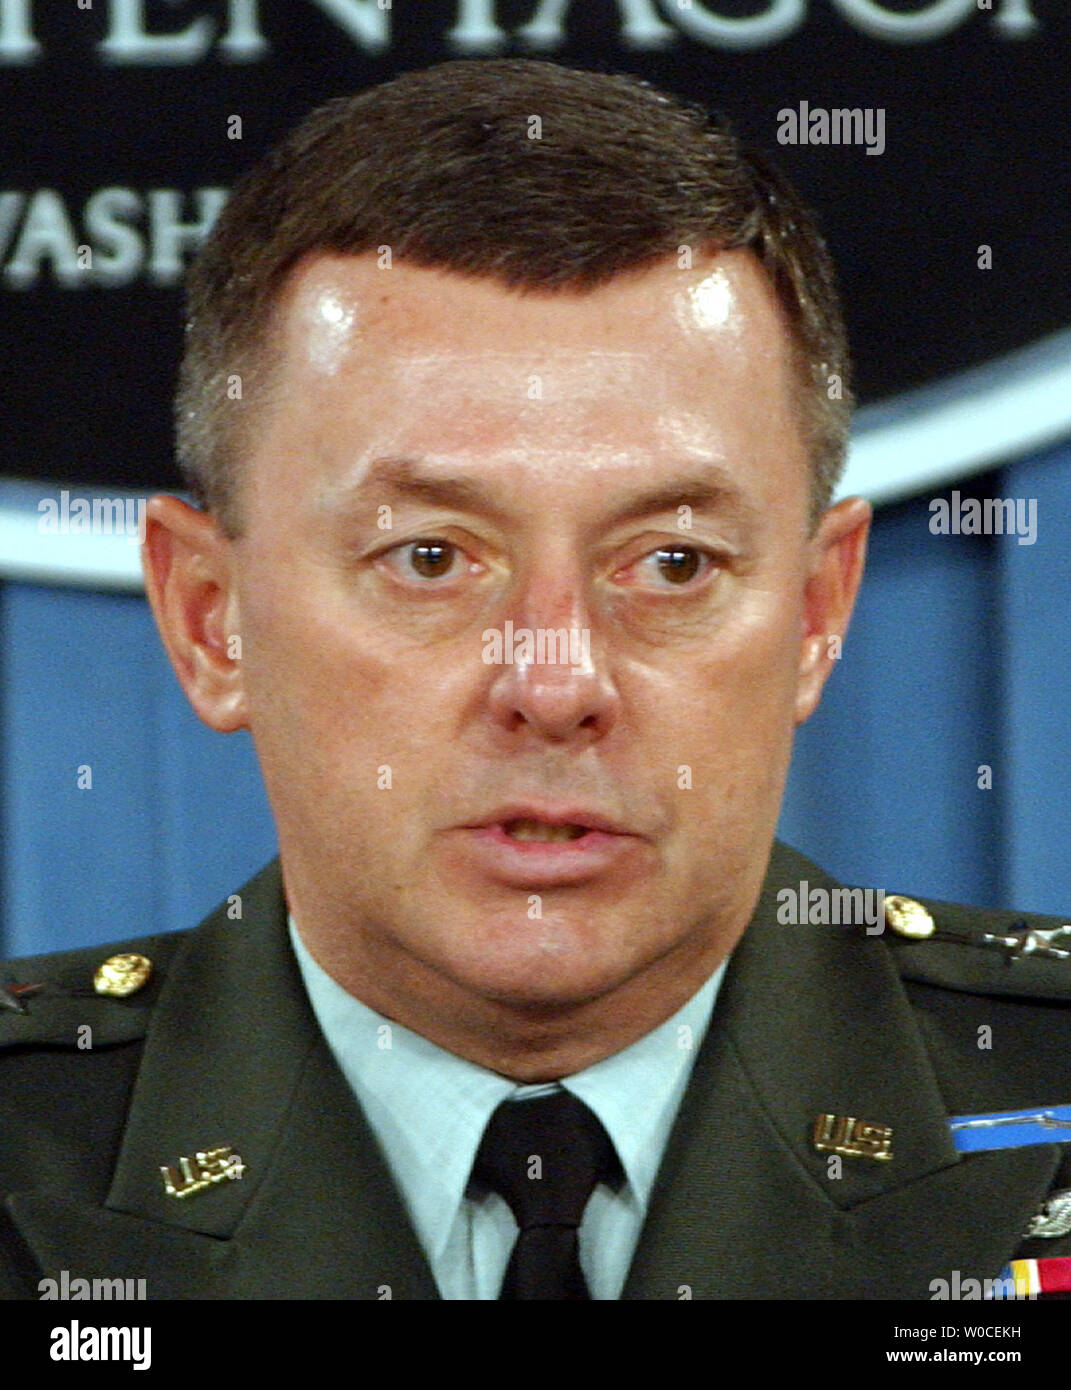 Lt. Gen. Anthony Jones answers questions from reporters about abuse at the Abu Ghraib prison in Iraq during a news conference at the Pentagon on Aug. 25, 2004, in Arlington, Va. The Defense Department investigation found that less than 50 individuals were to blame for the abuses, but that officers above them in the chain of command made errors that led to the conditions that resulted in the abuses.  (UPI Photo/Roger L. Wollenberg) Stock Photo